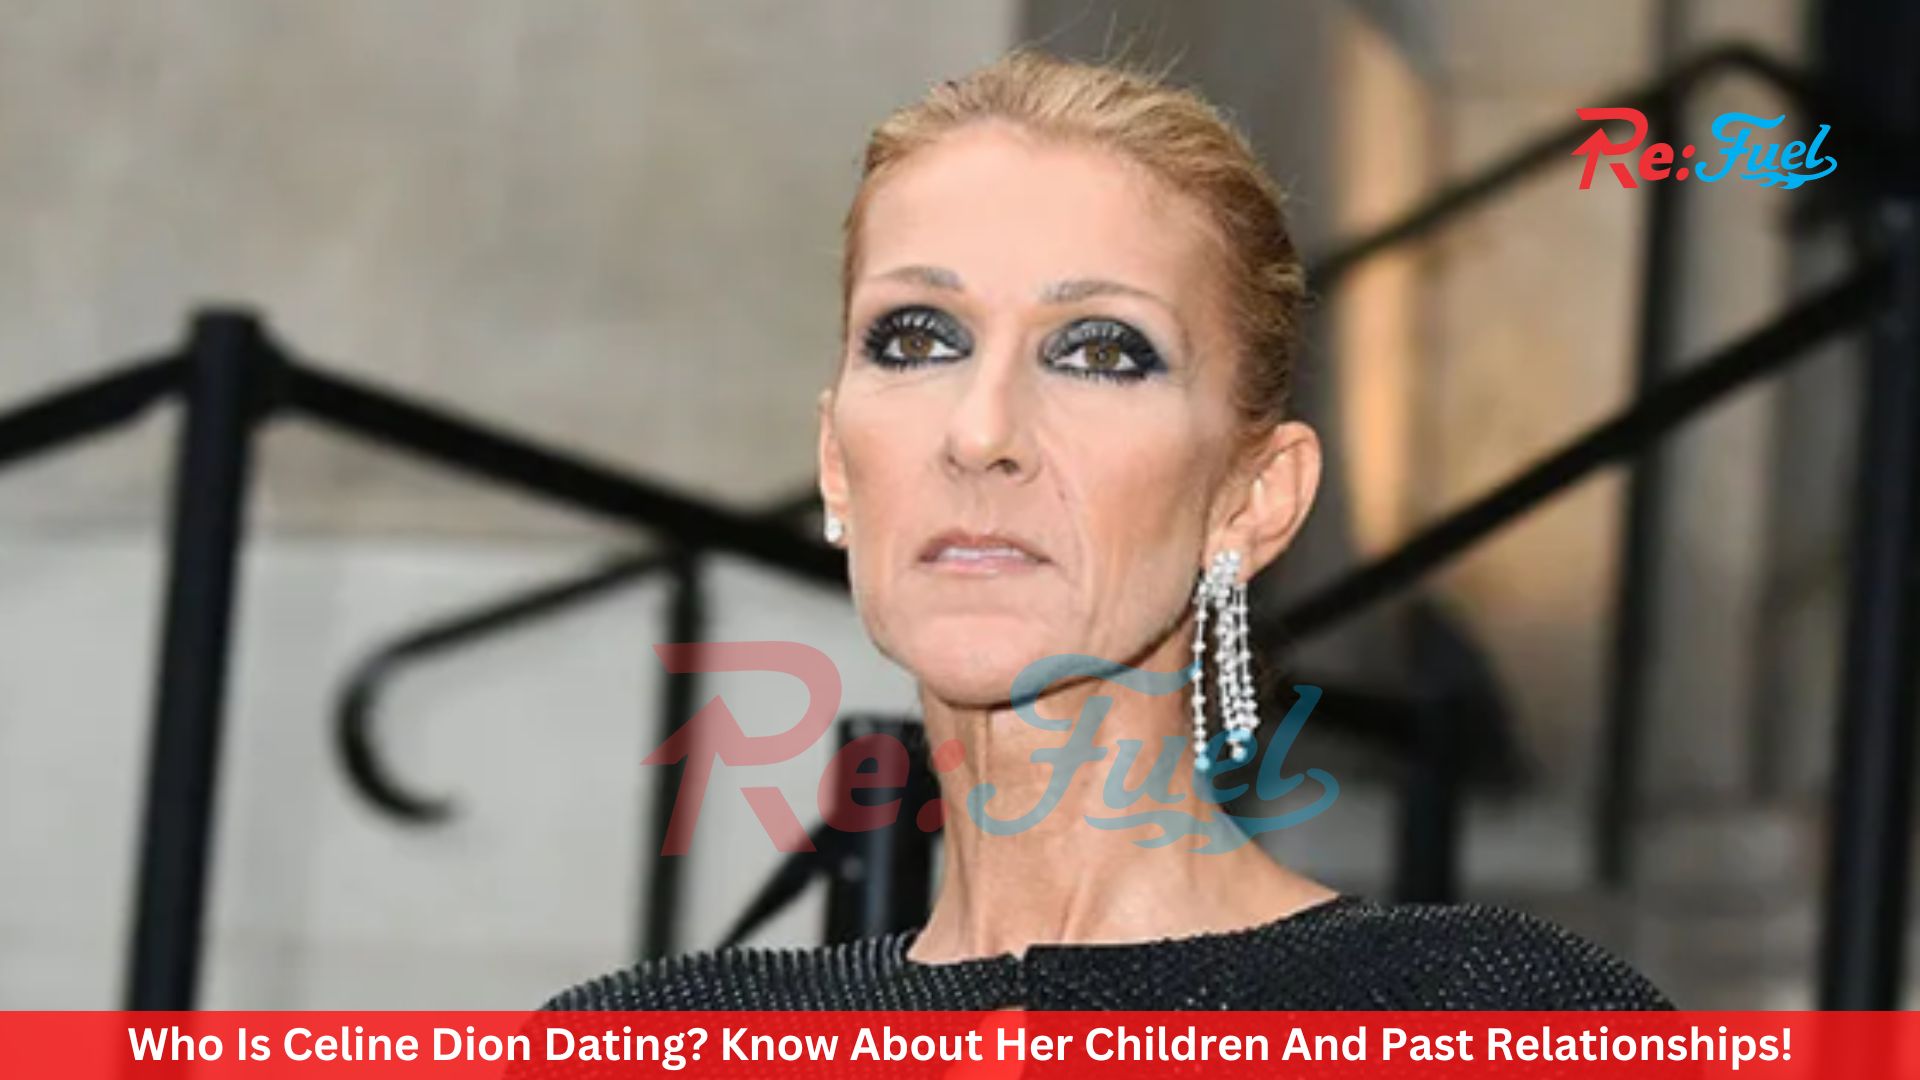 Who Is Celine Dion Dating? Know About Her Children And Past Relationships!